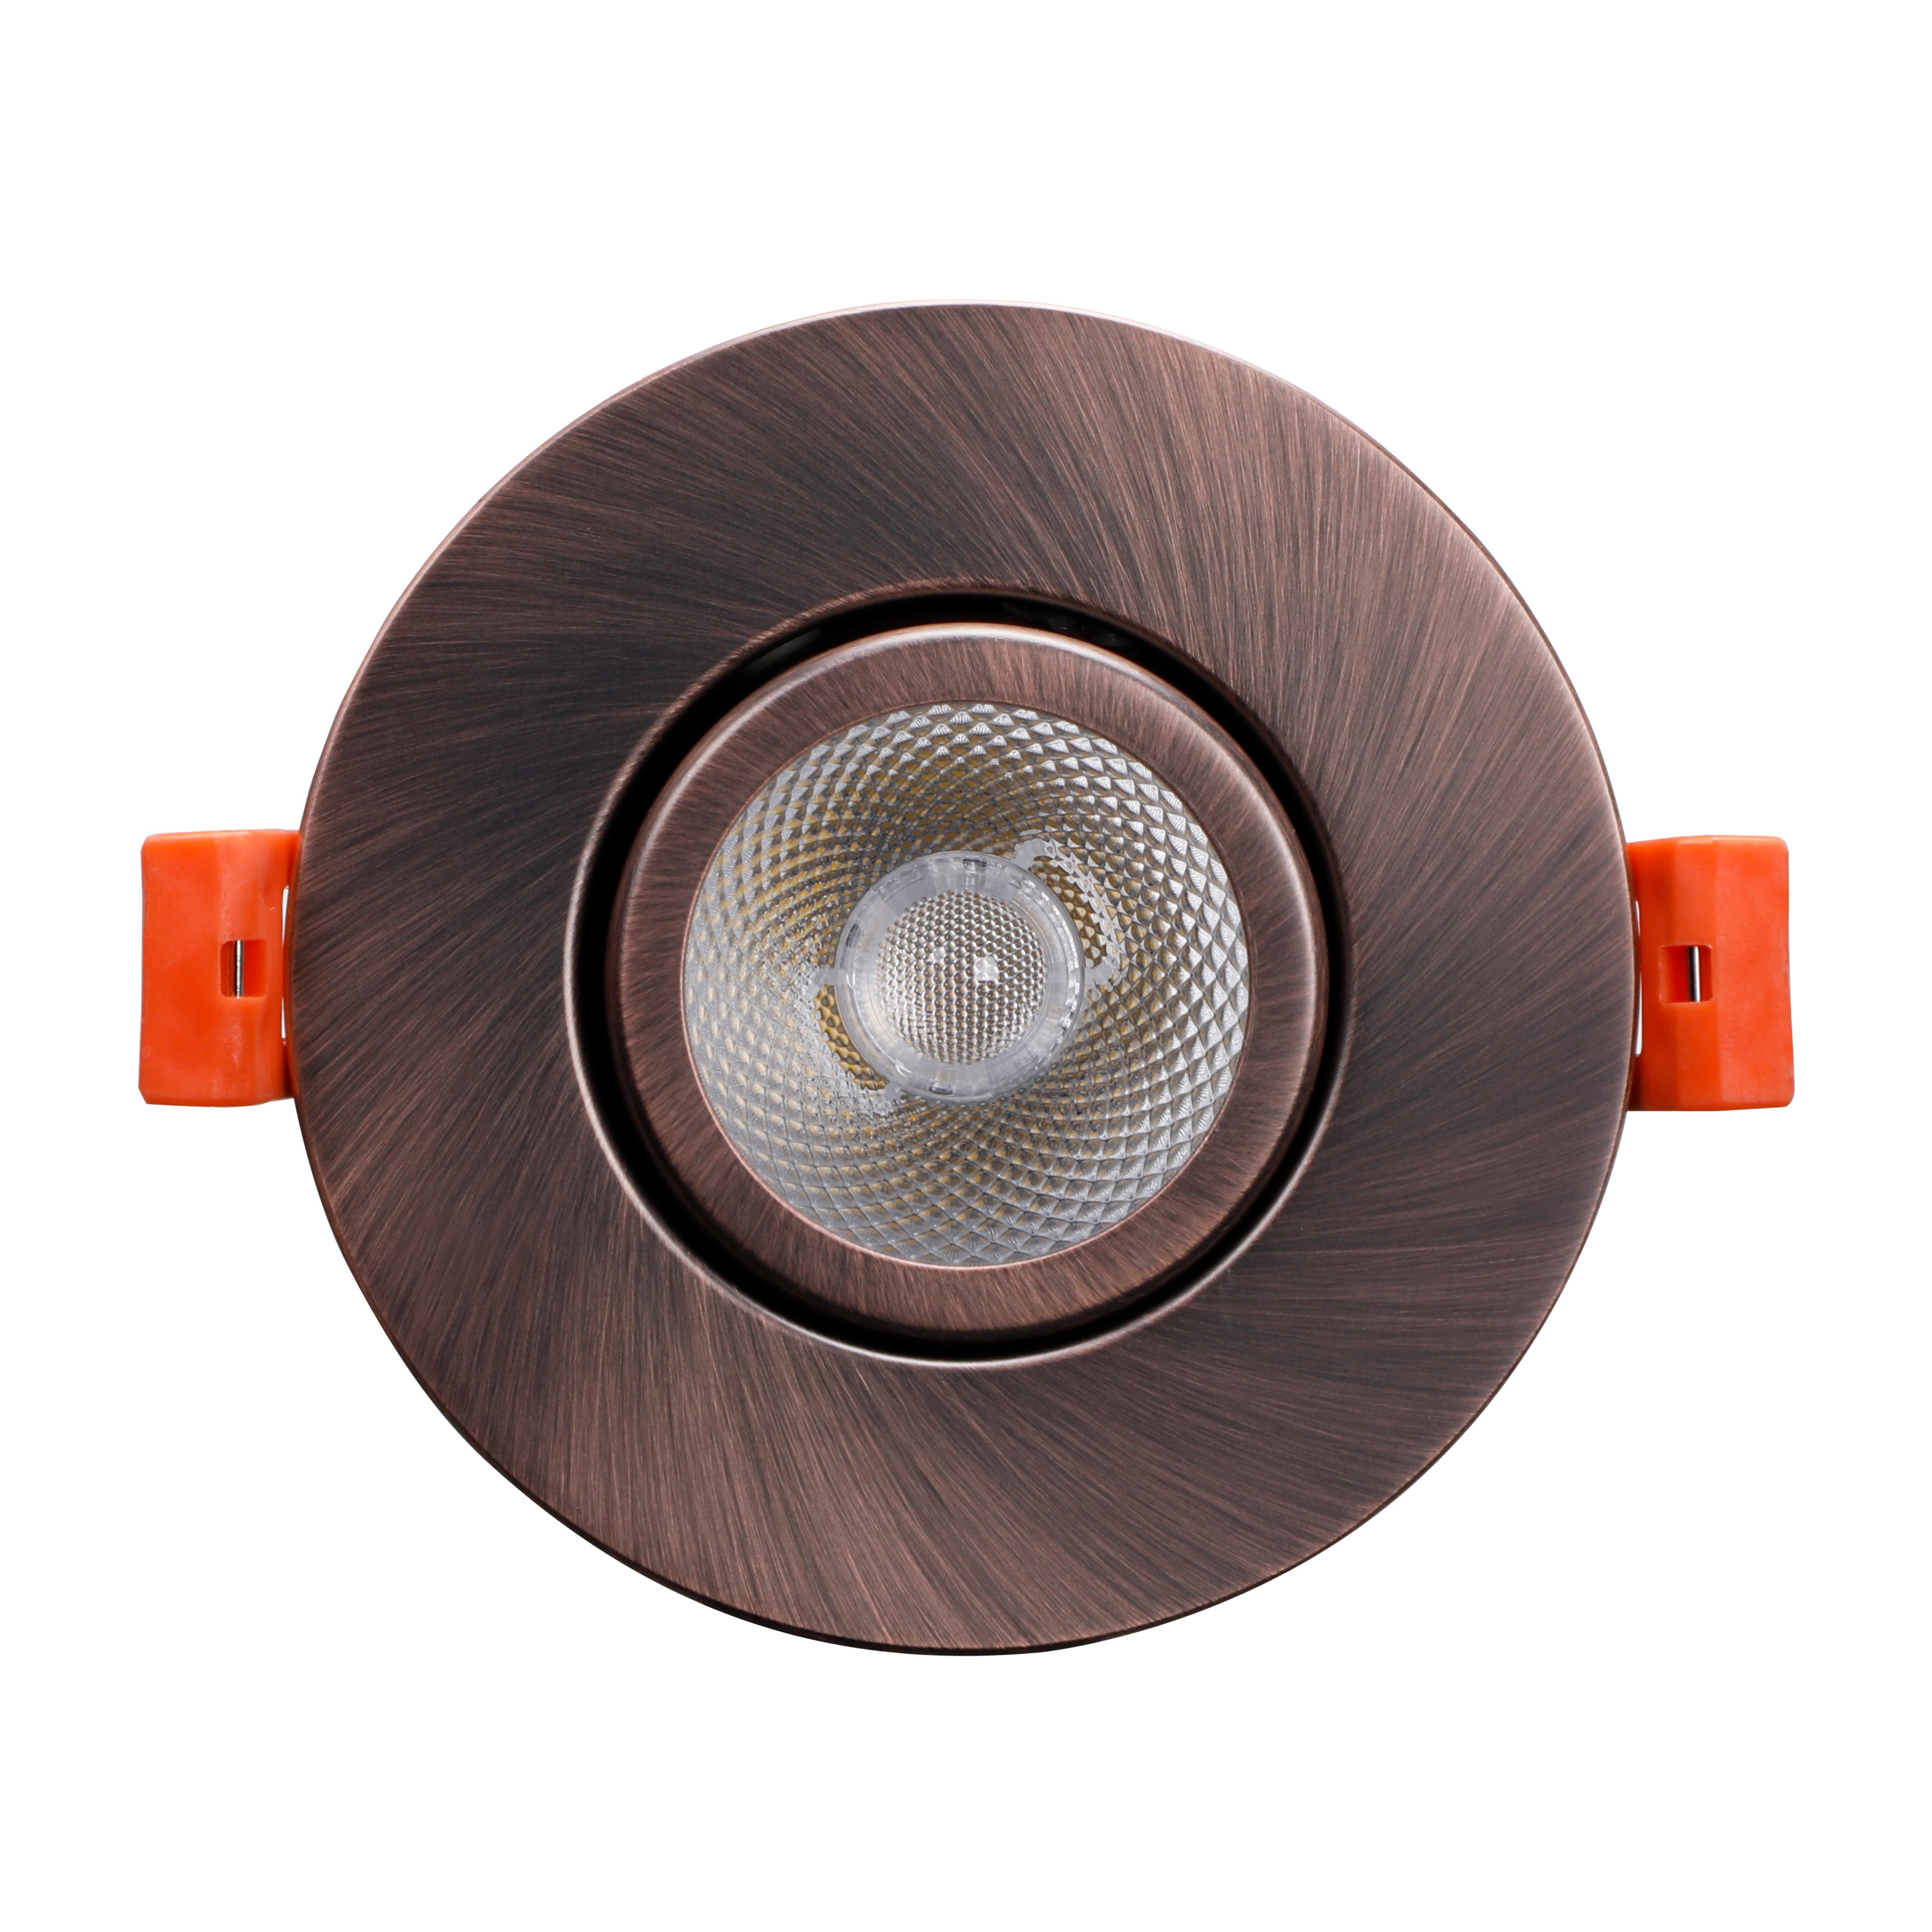 Circulex 3" Gimbal LED Recessed Light - Oil Rubbed Bronze - 7W - Single CCT